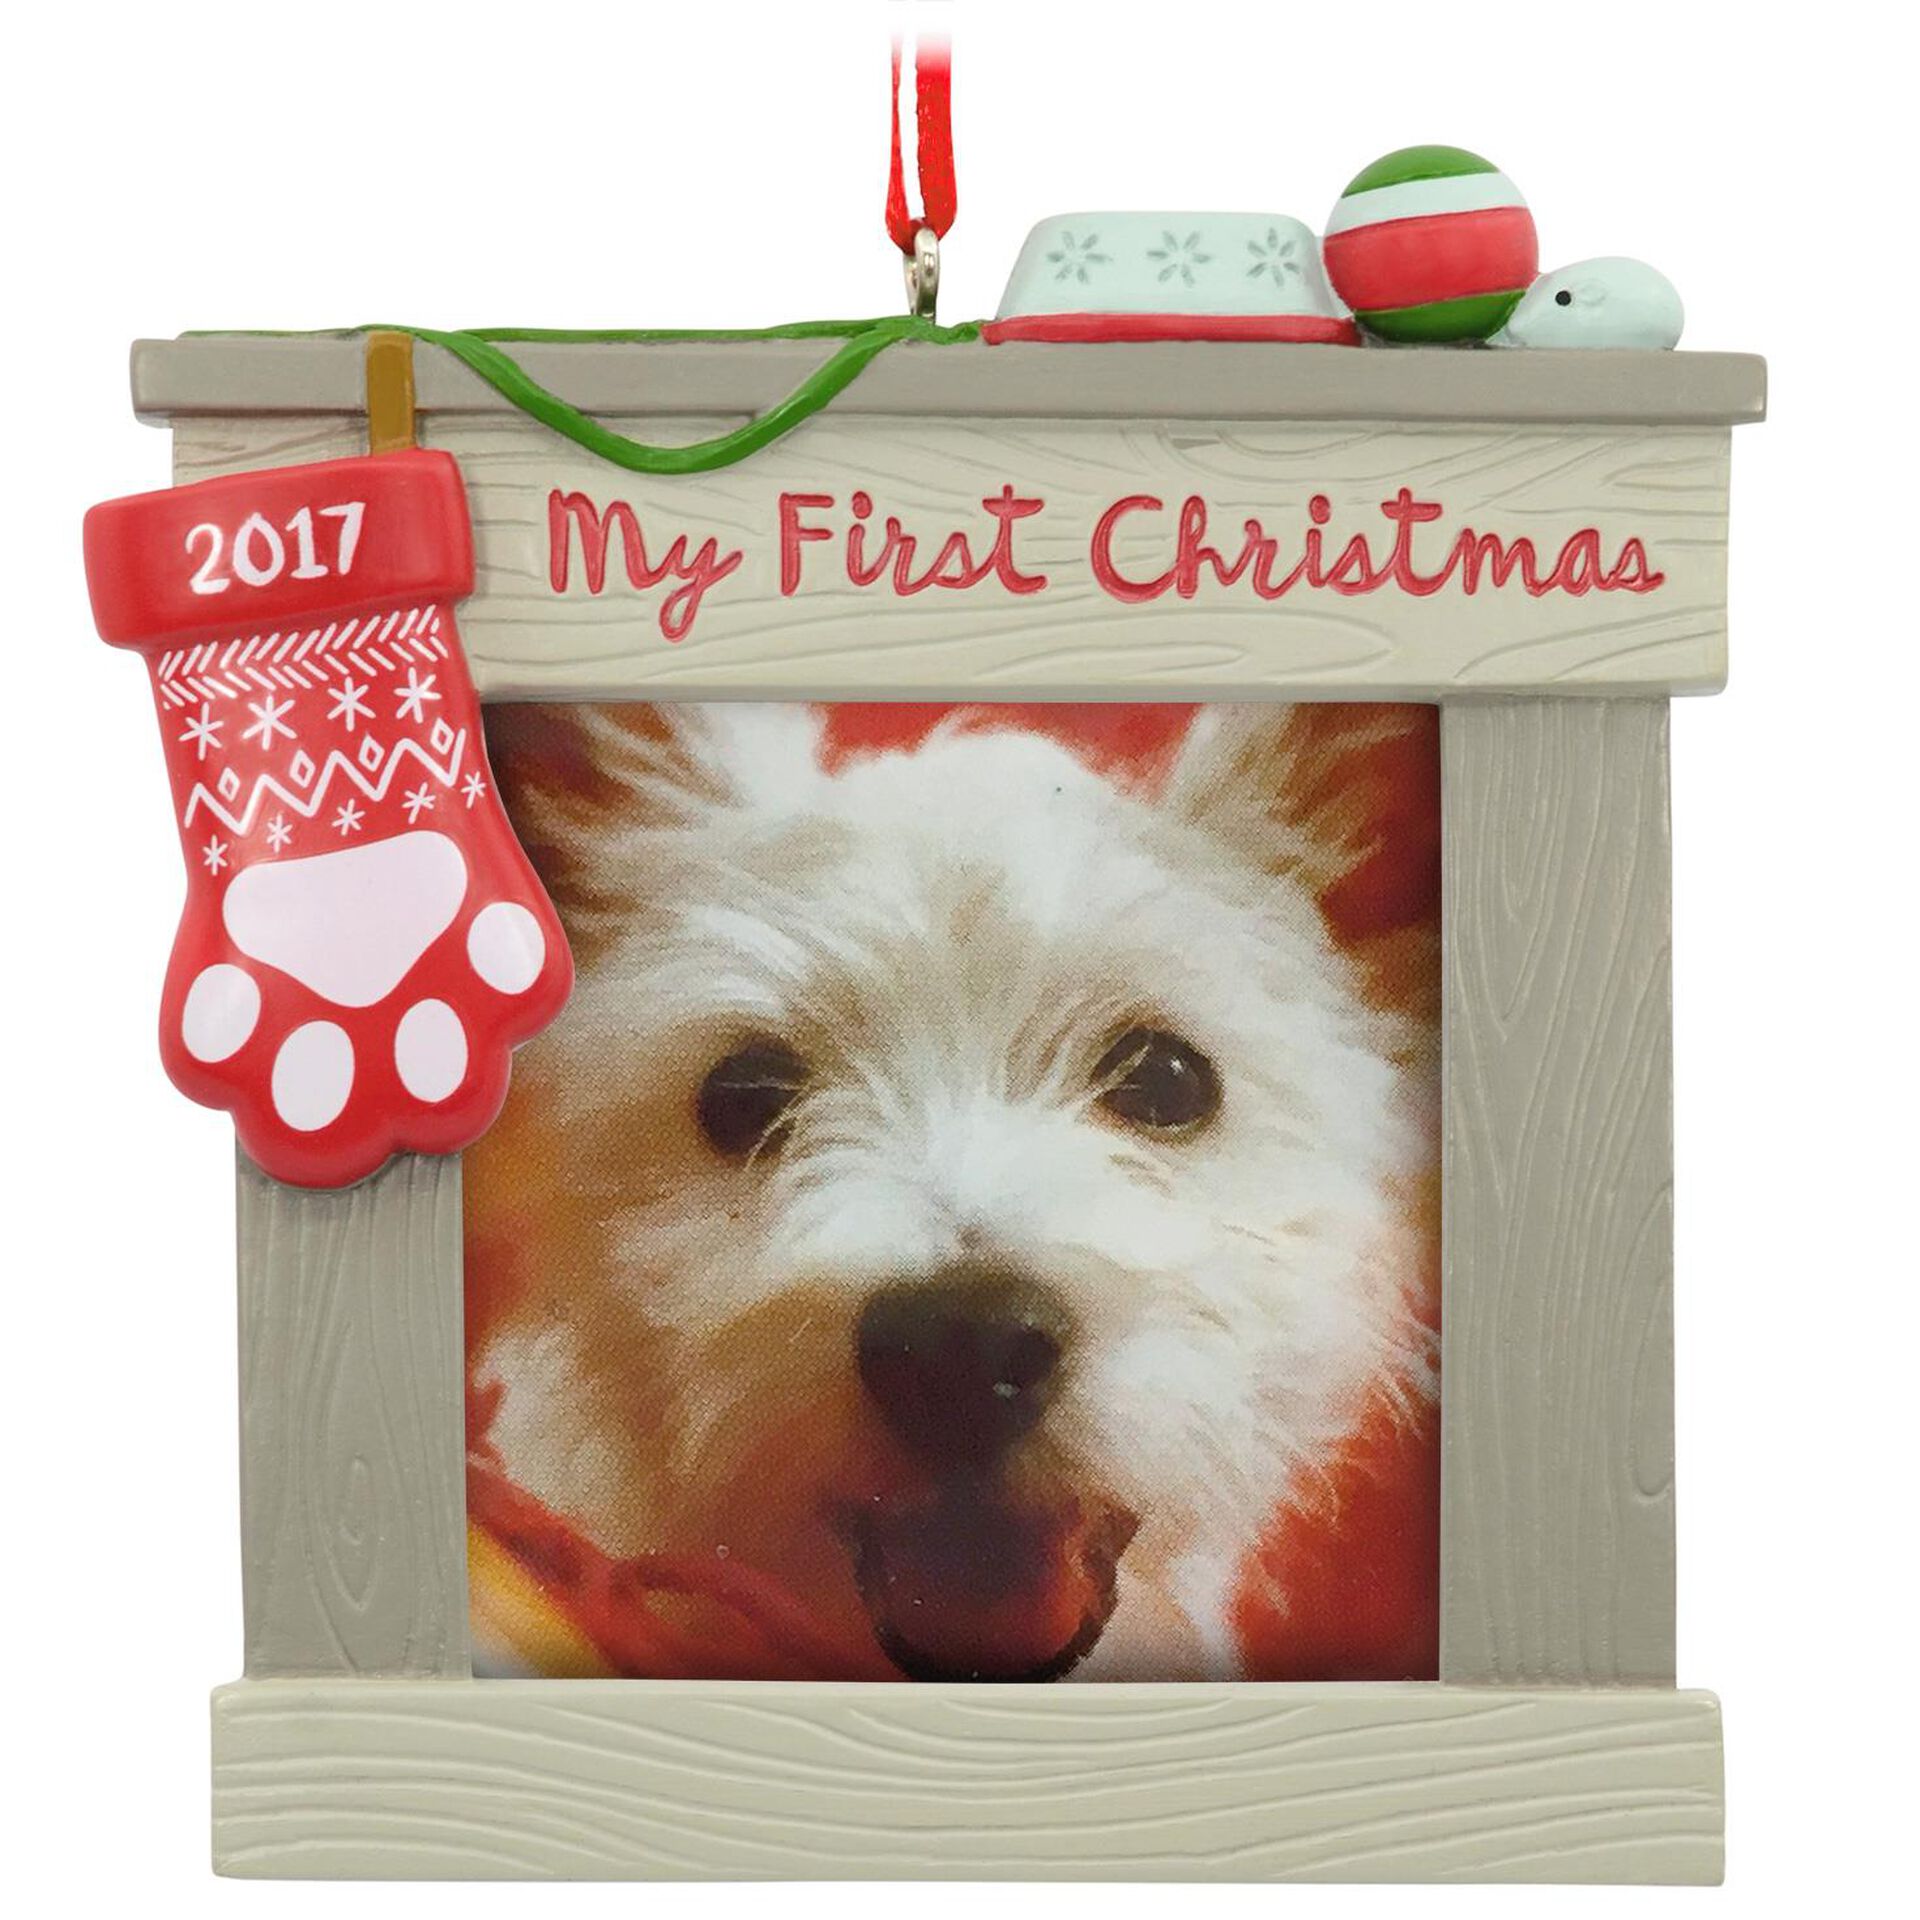 Pet's First Christmas 2017 Picture Frame Hallmark Ornament